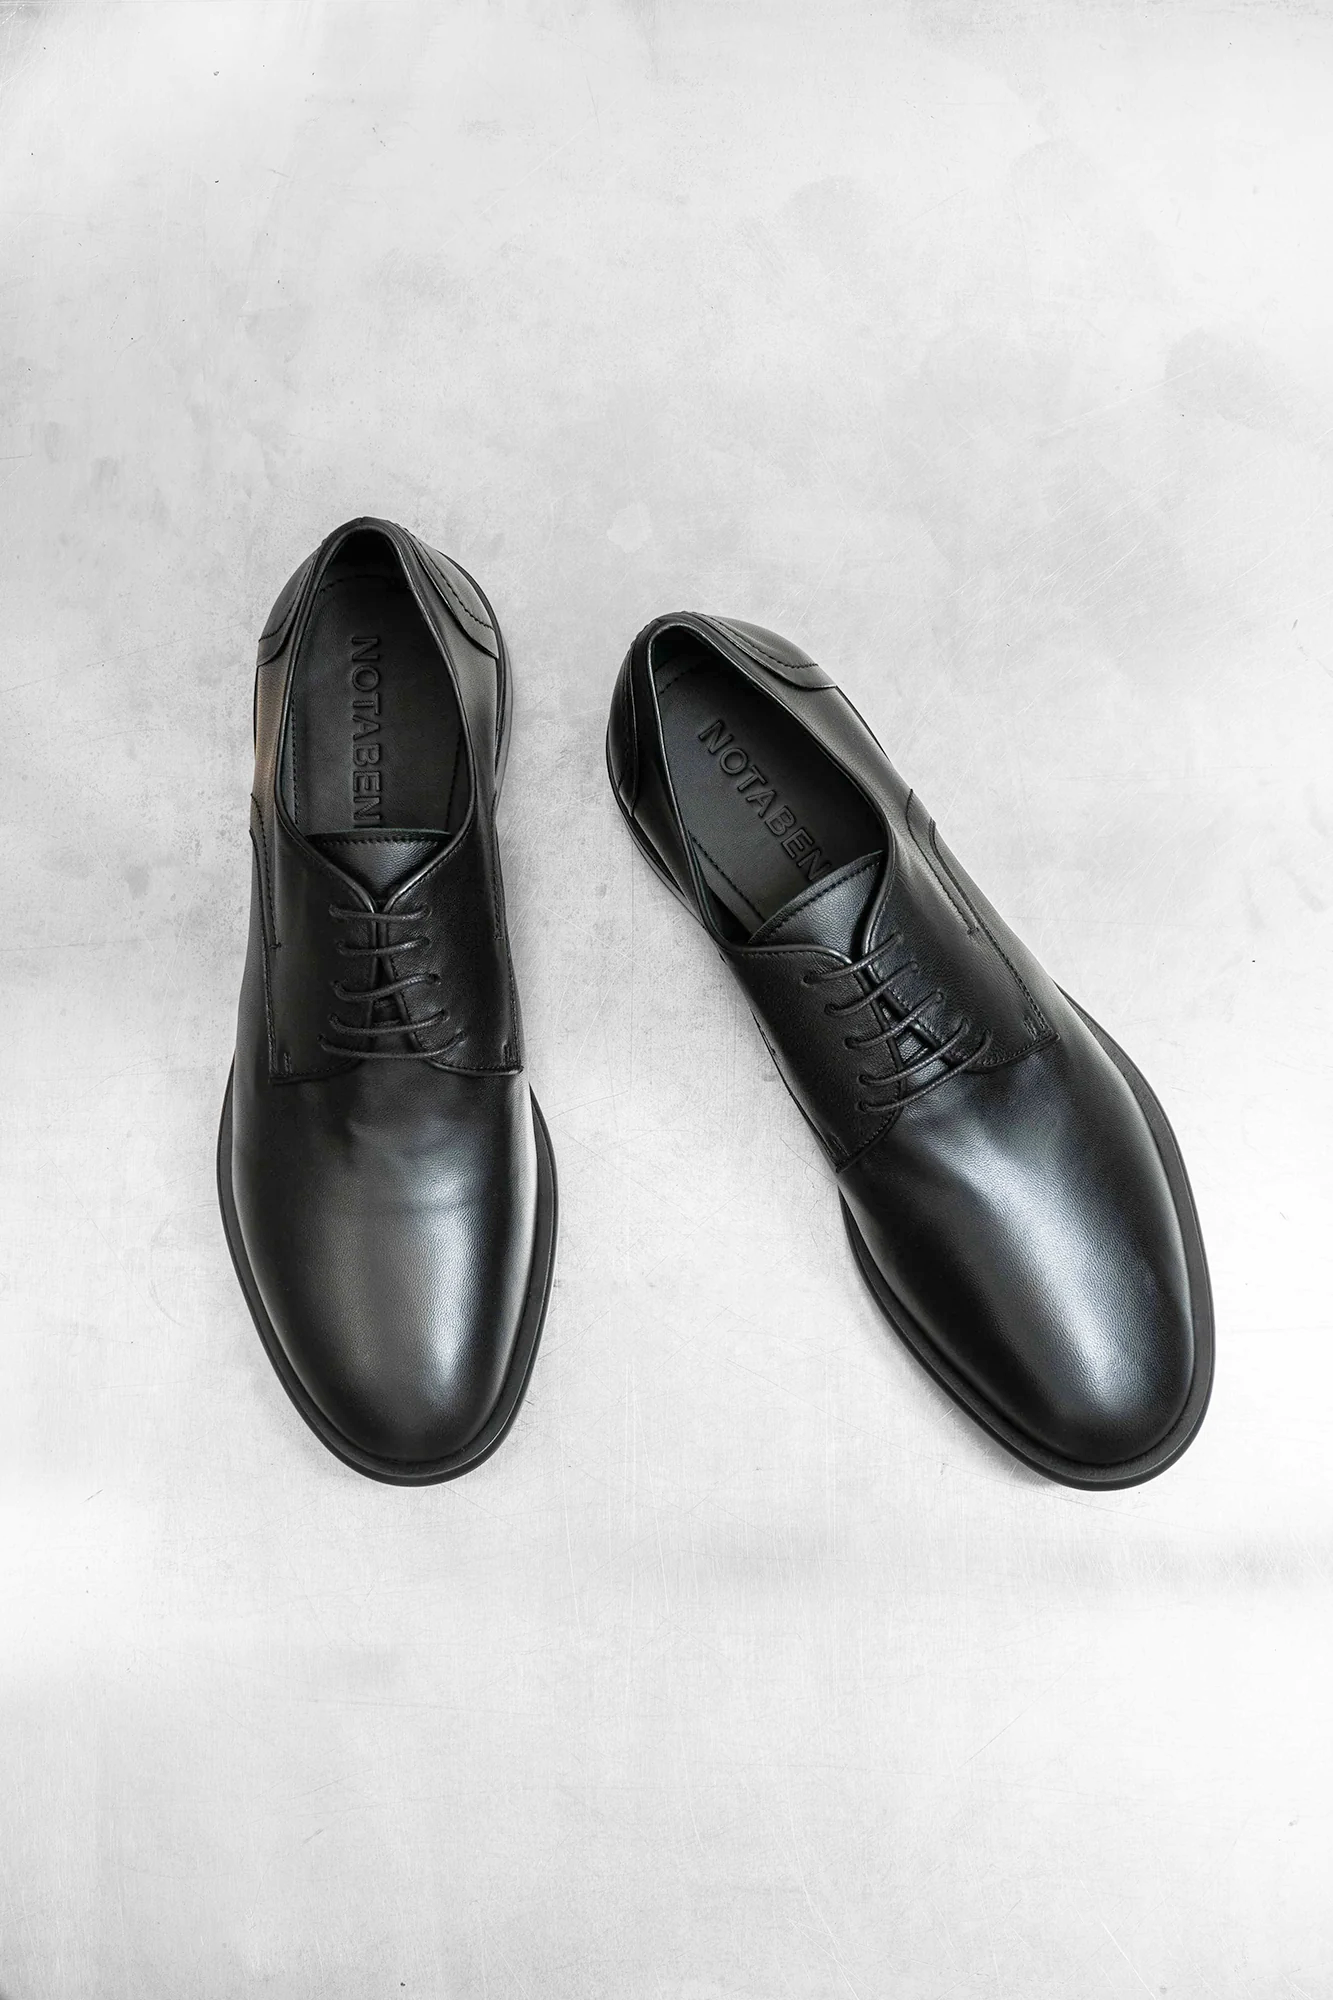 Santino lace-up shoes, black leather